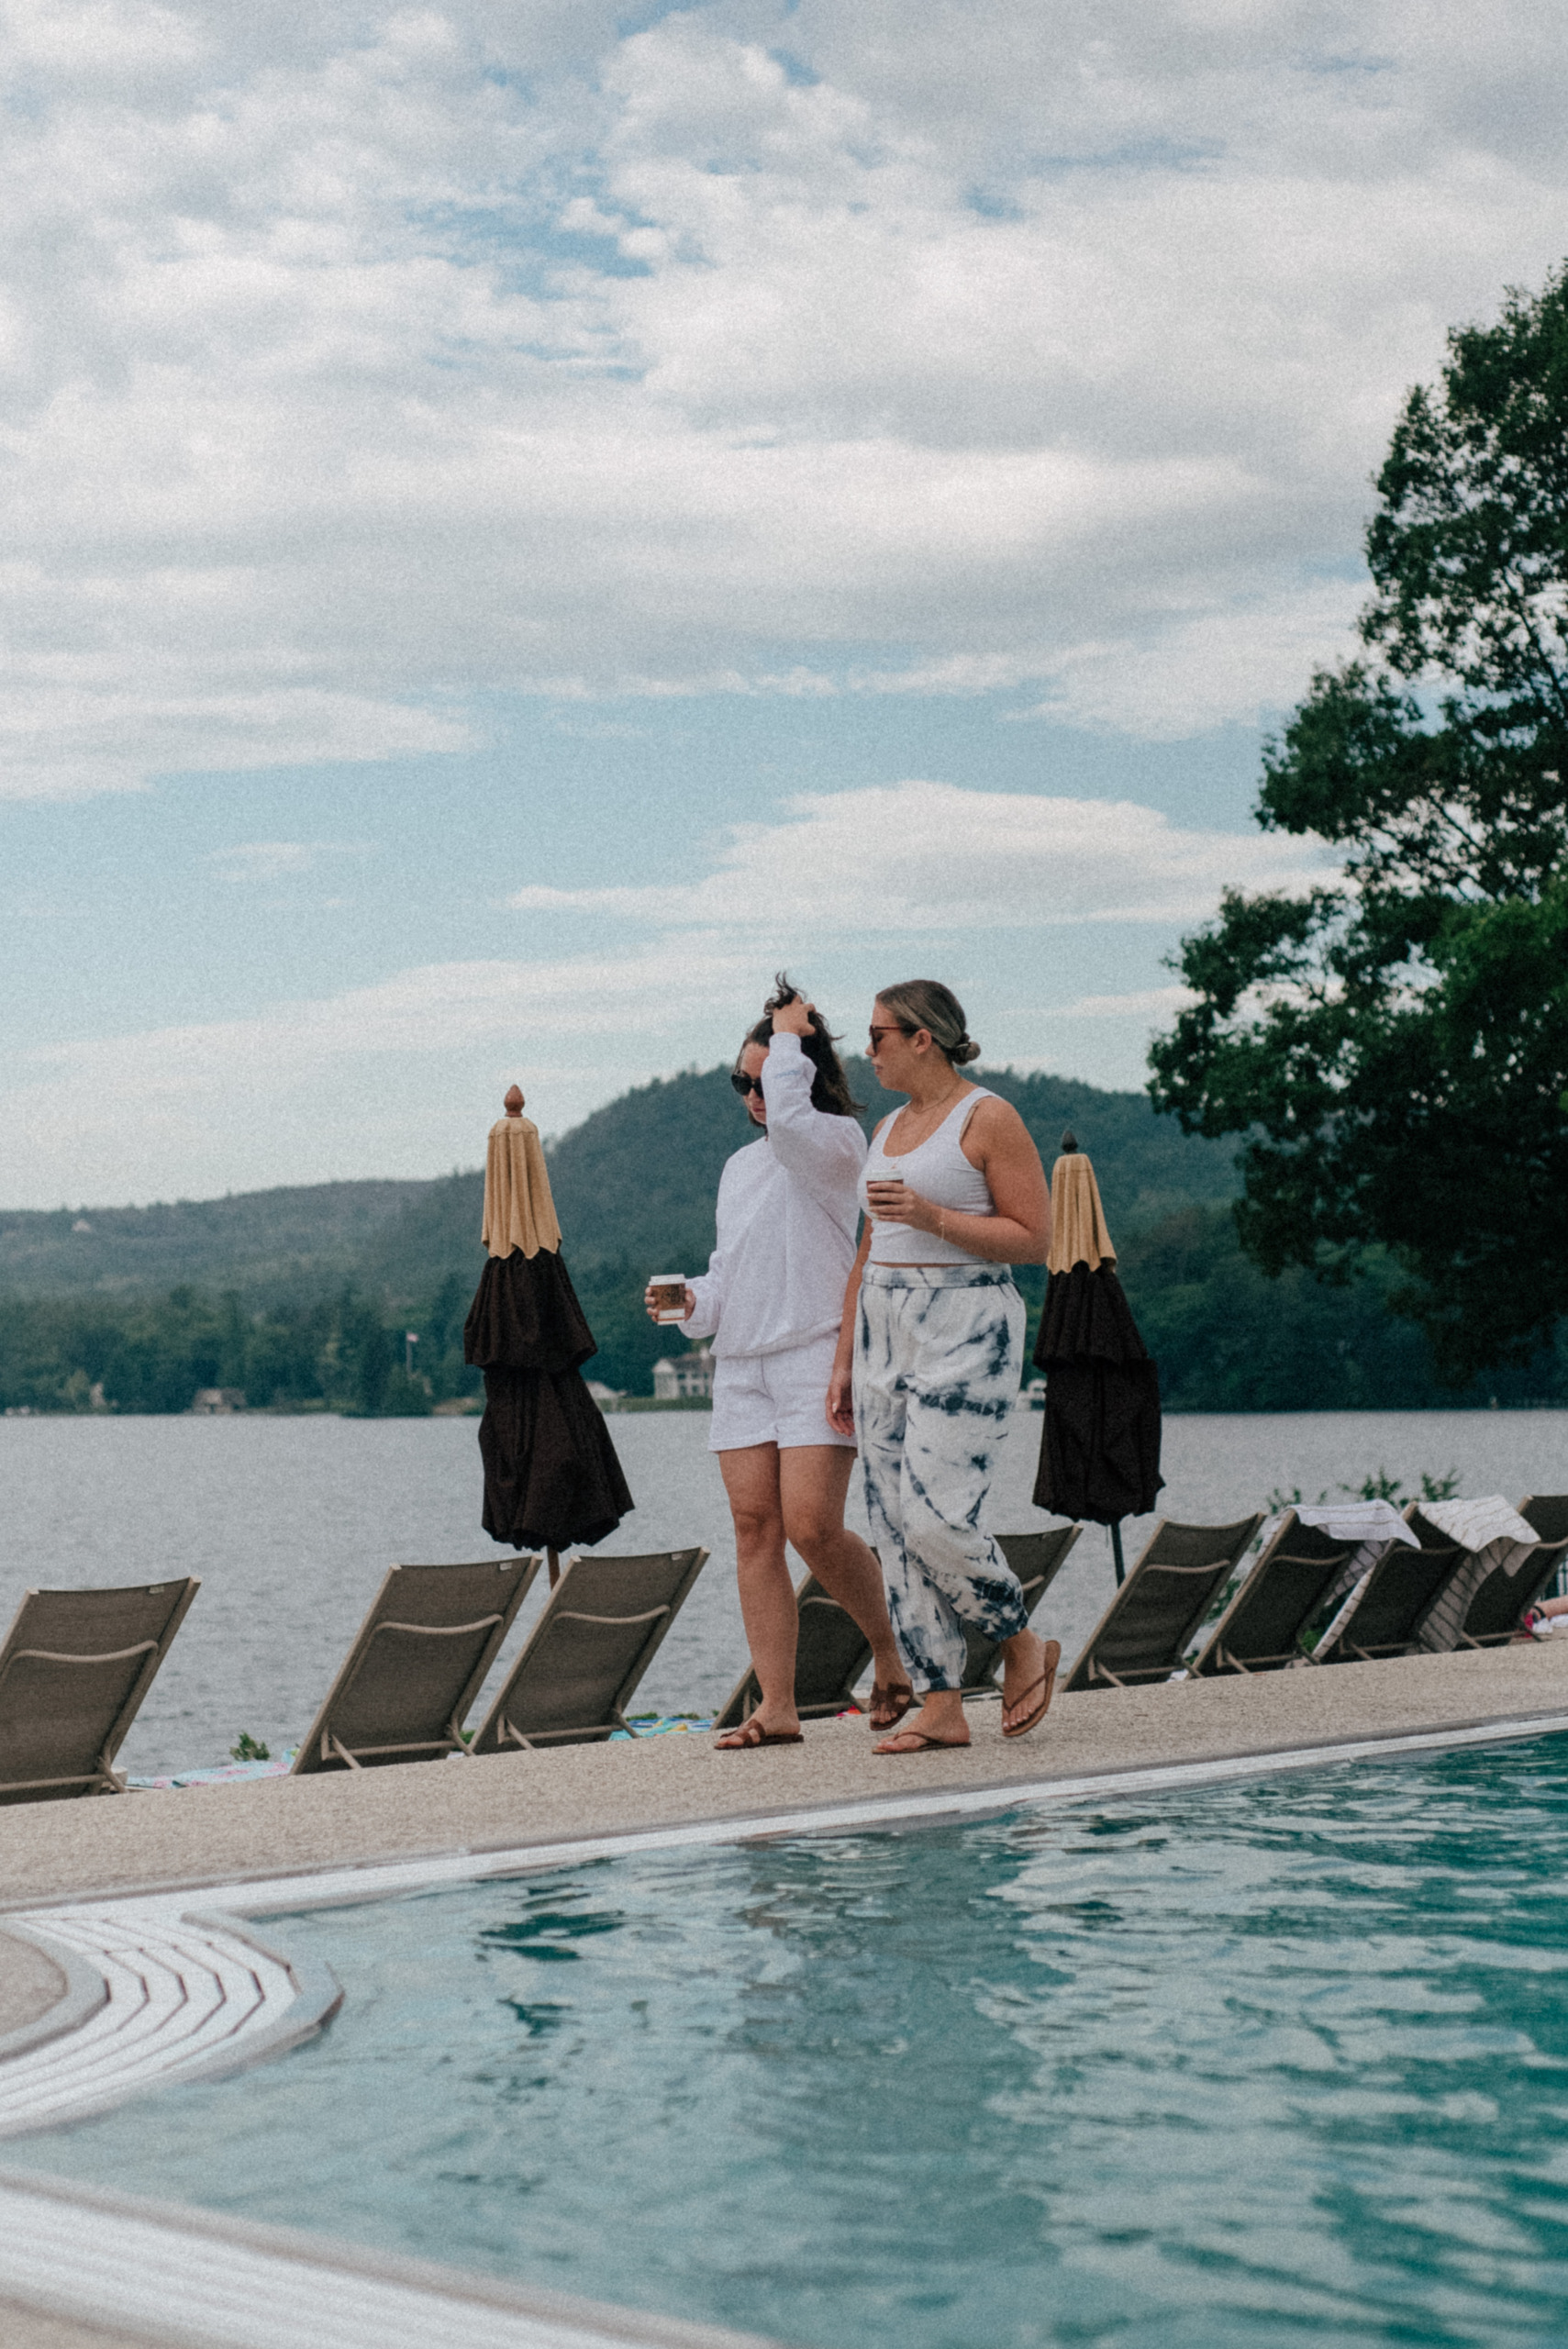 Three Day Getaway to The Sagamore Resort on Lake George New York - Simply by Simone and Jackie Giardina by the Pool